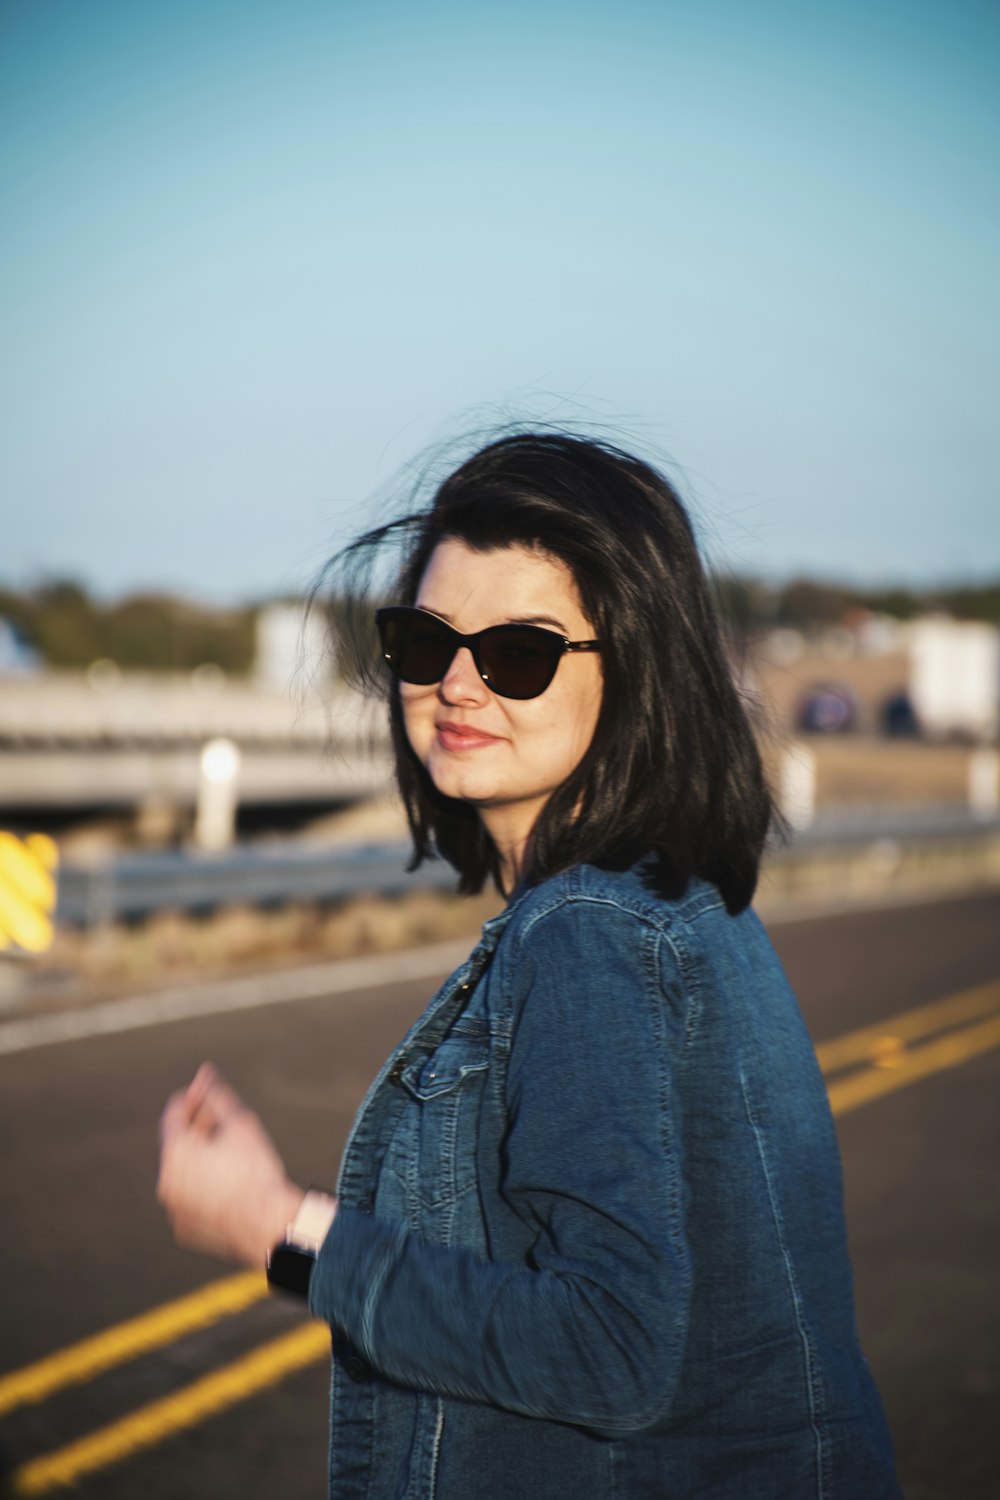 a woman wearing sunglasses standing on the side of a road